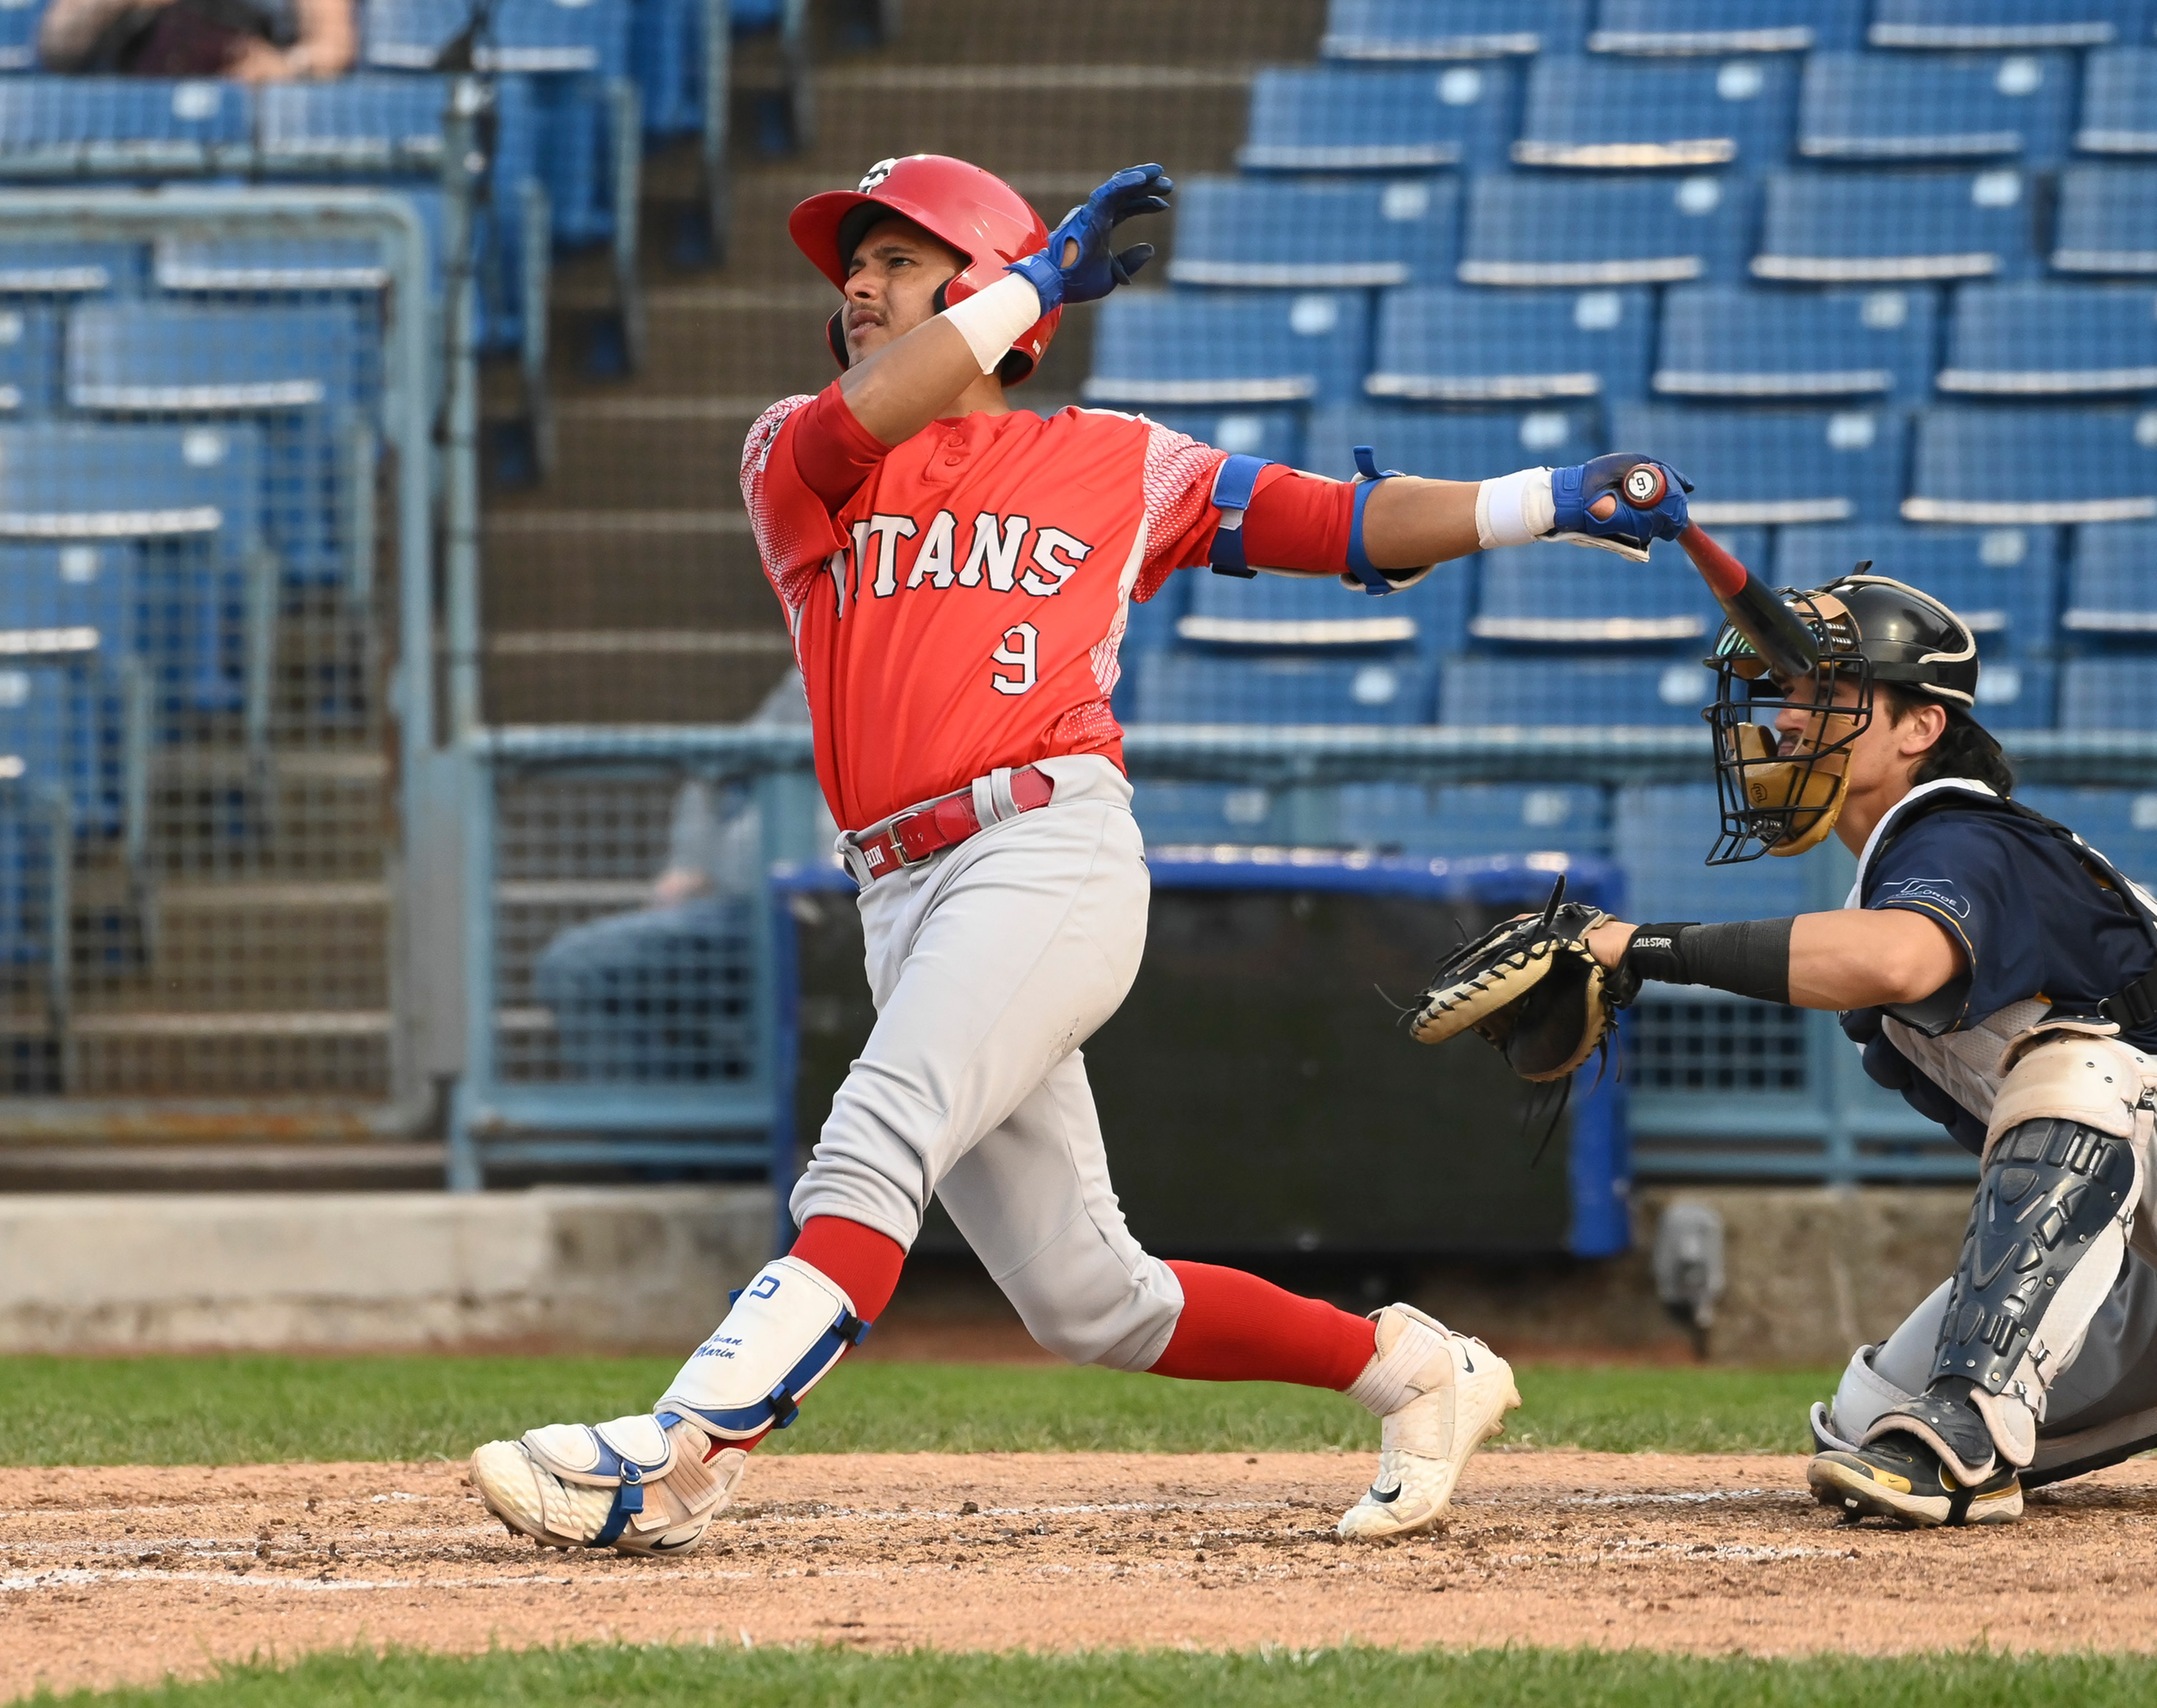 EARLY DEFICIT STINGS TITANS IN LOSS TO CAPITALES